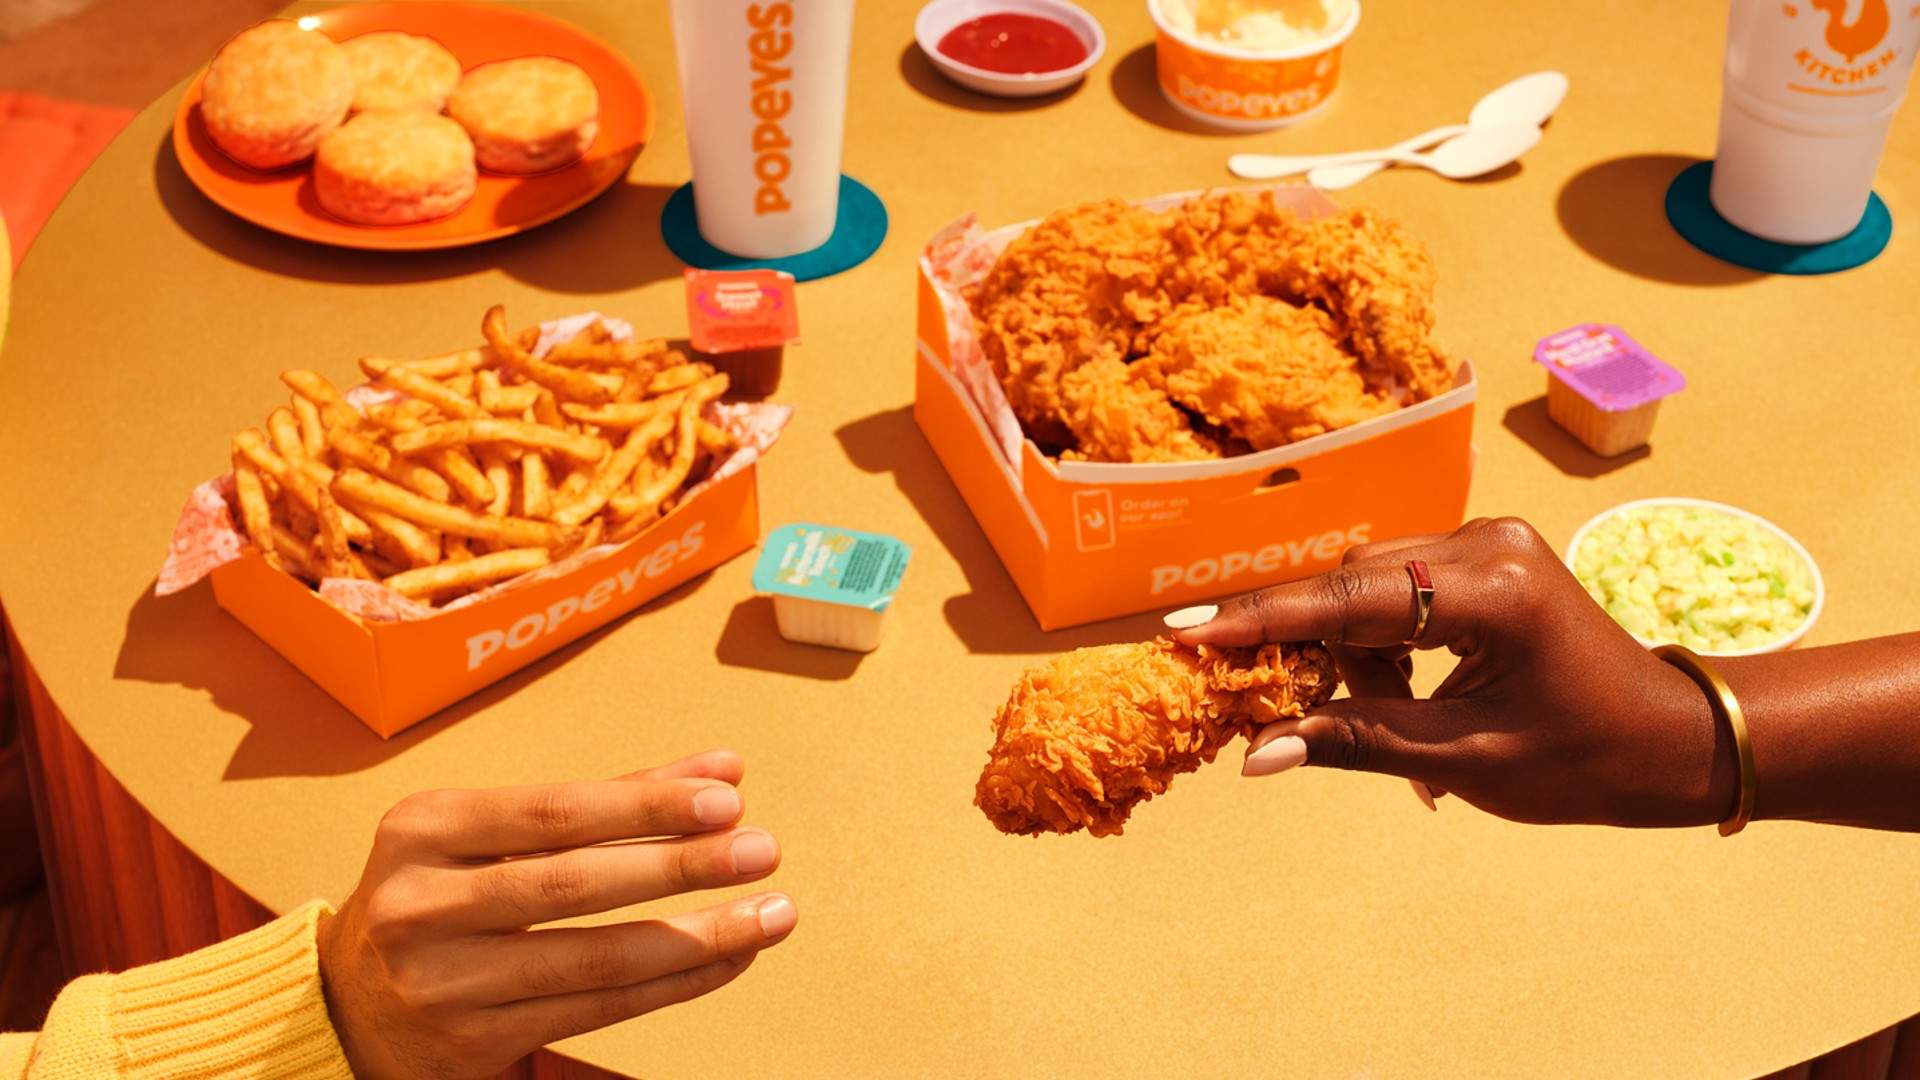 Background image for Save the Date: US Favourite Popeyes Fried Chicken Is Touching Down in Auckland This April